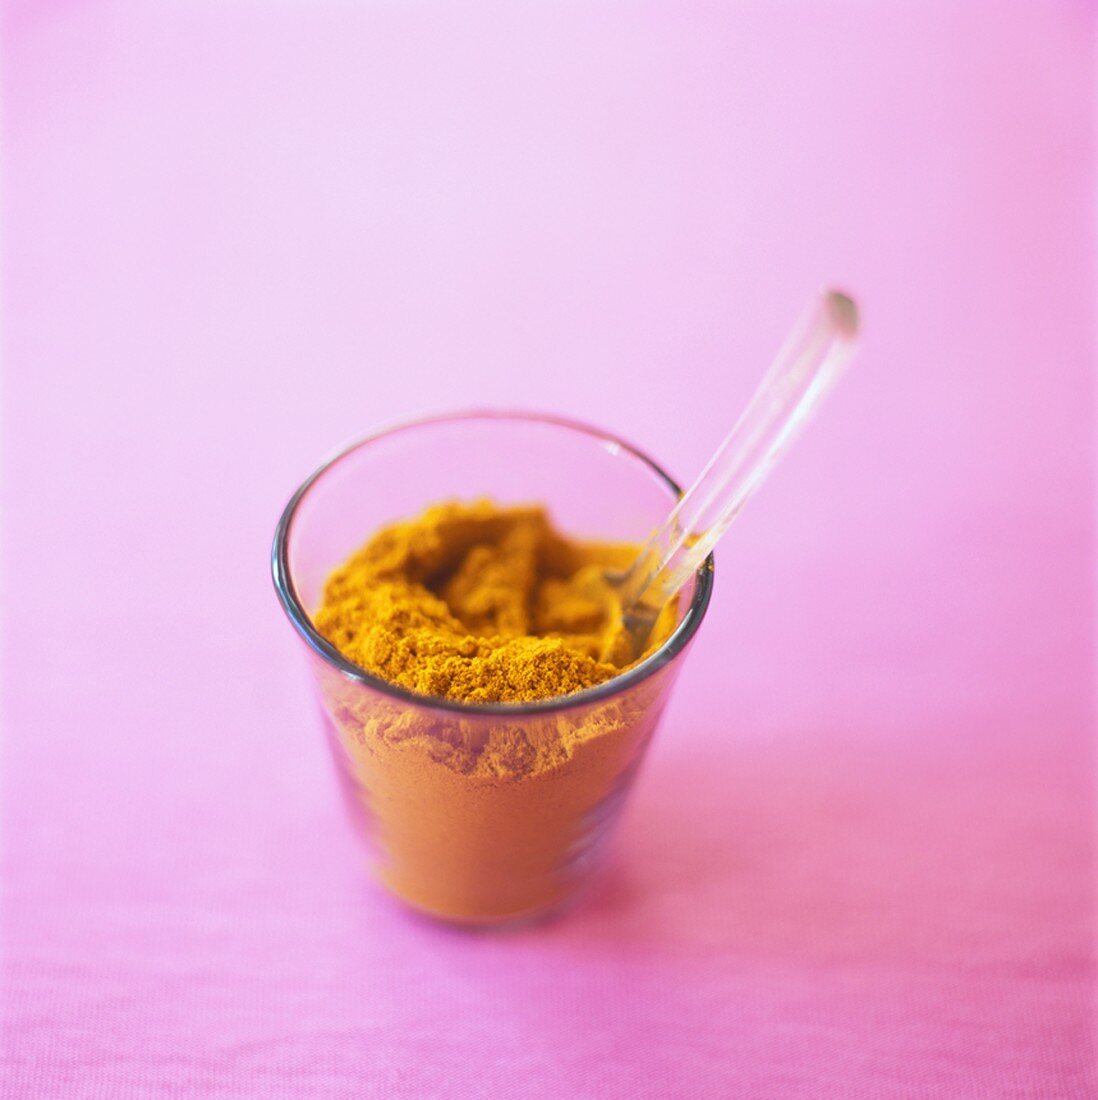 Ground turmeric in a glass, pink background